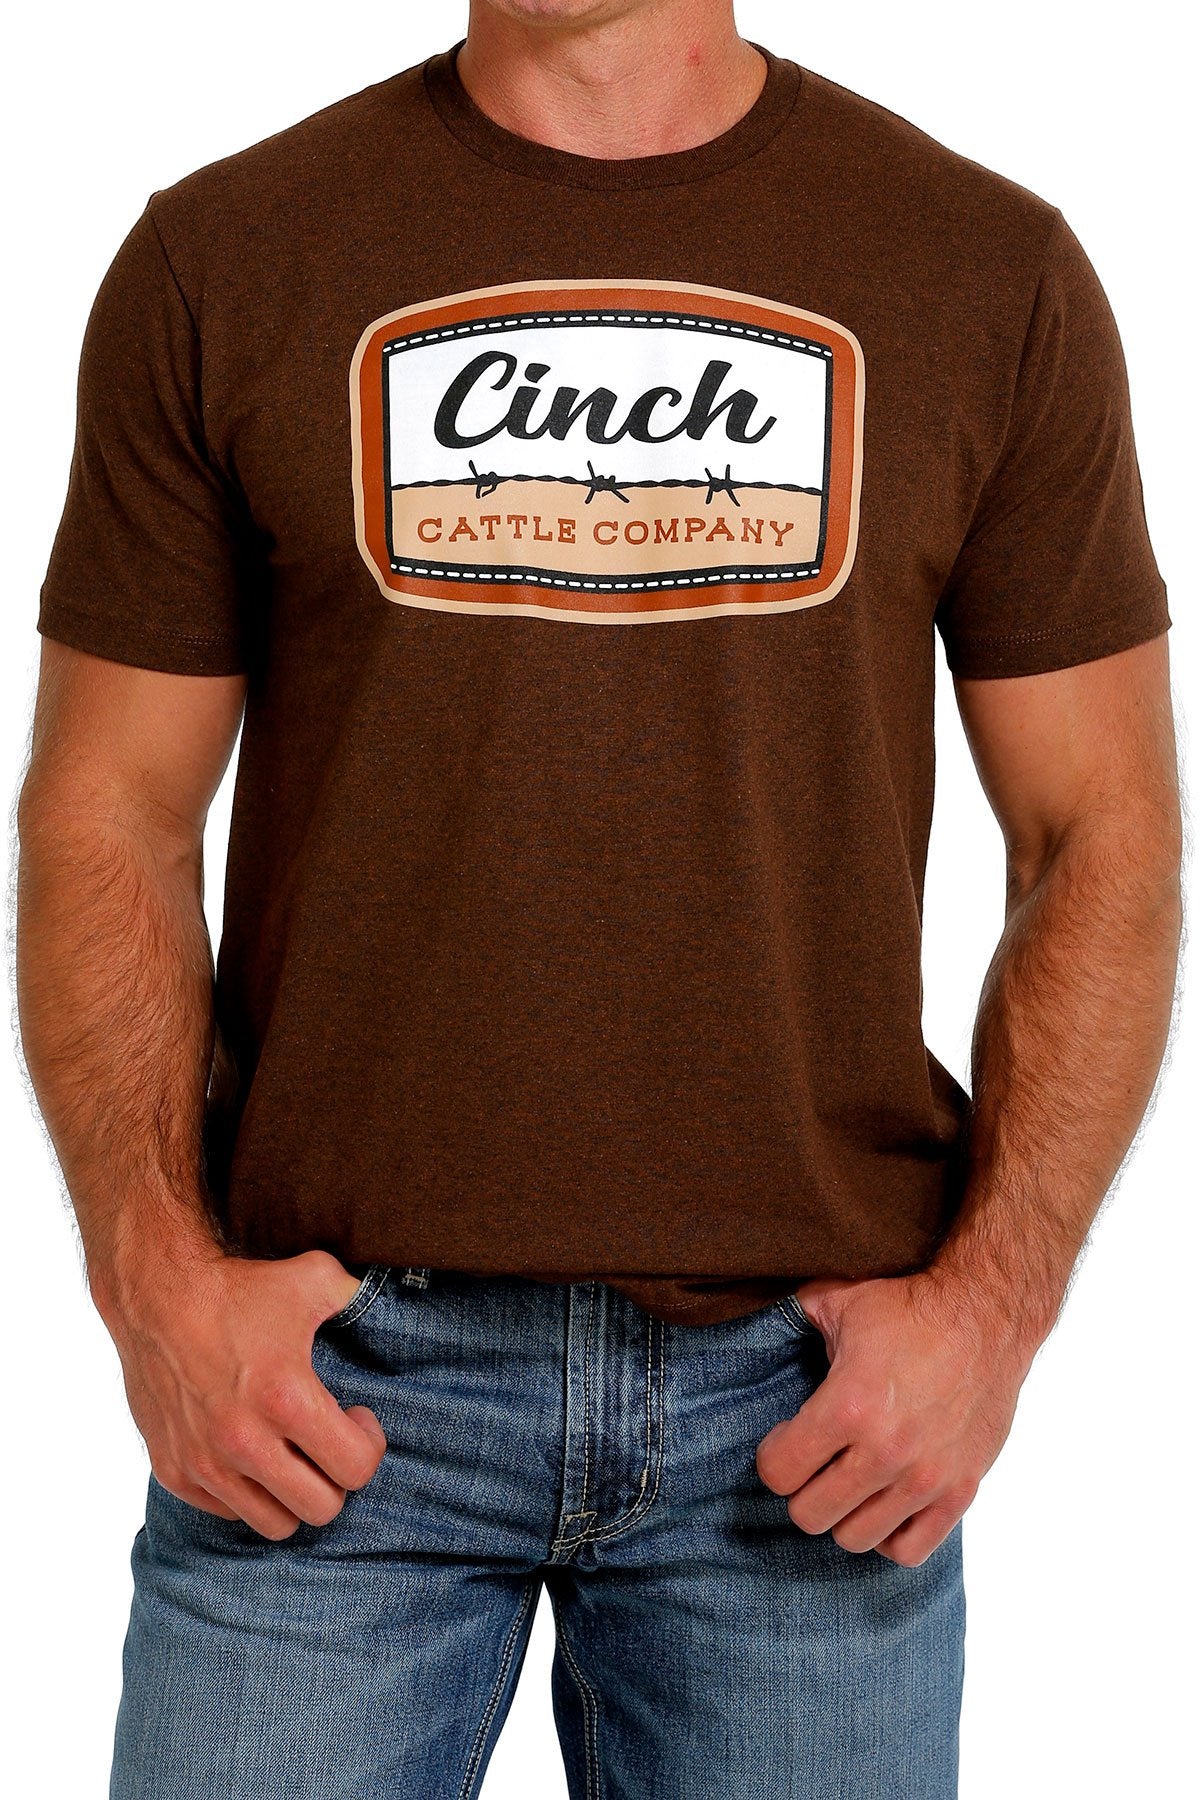 Cinch Mens S/S Cattle Outpost T-Shirt